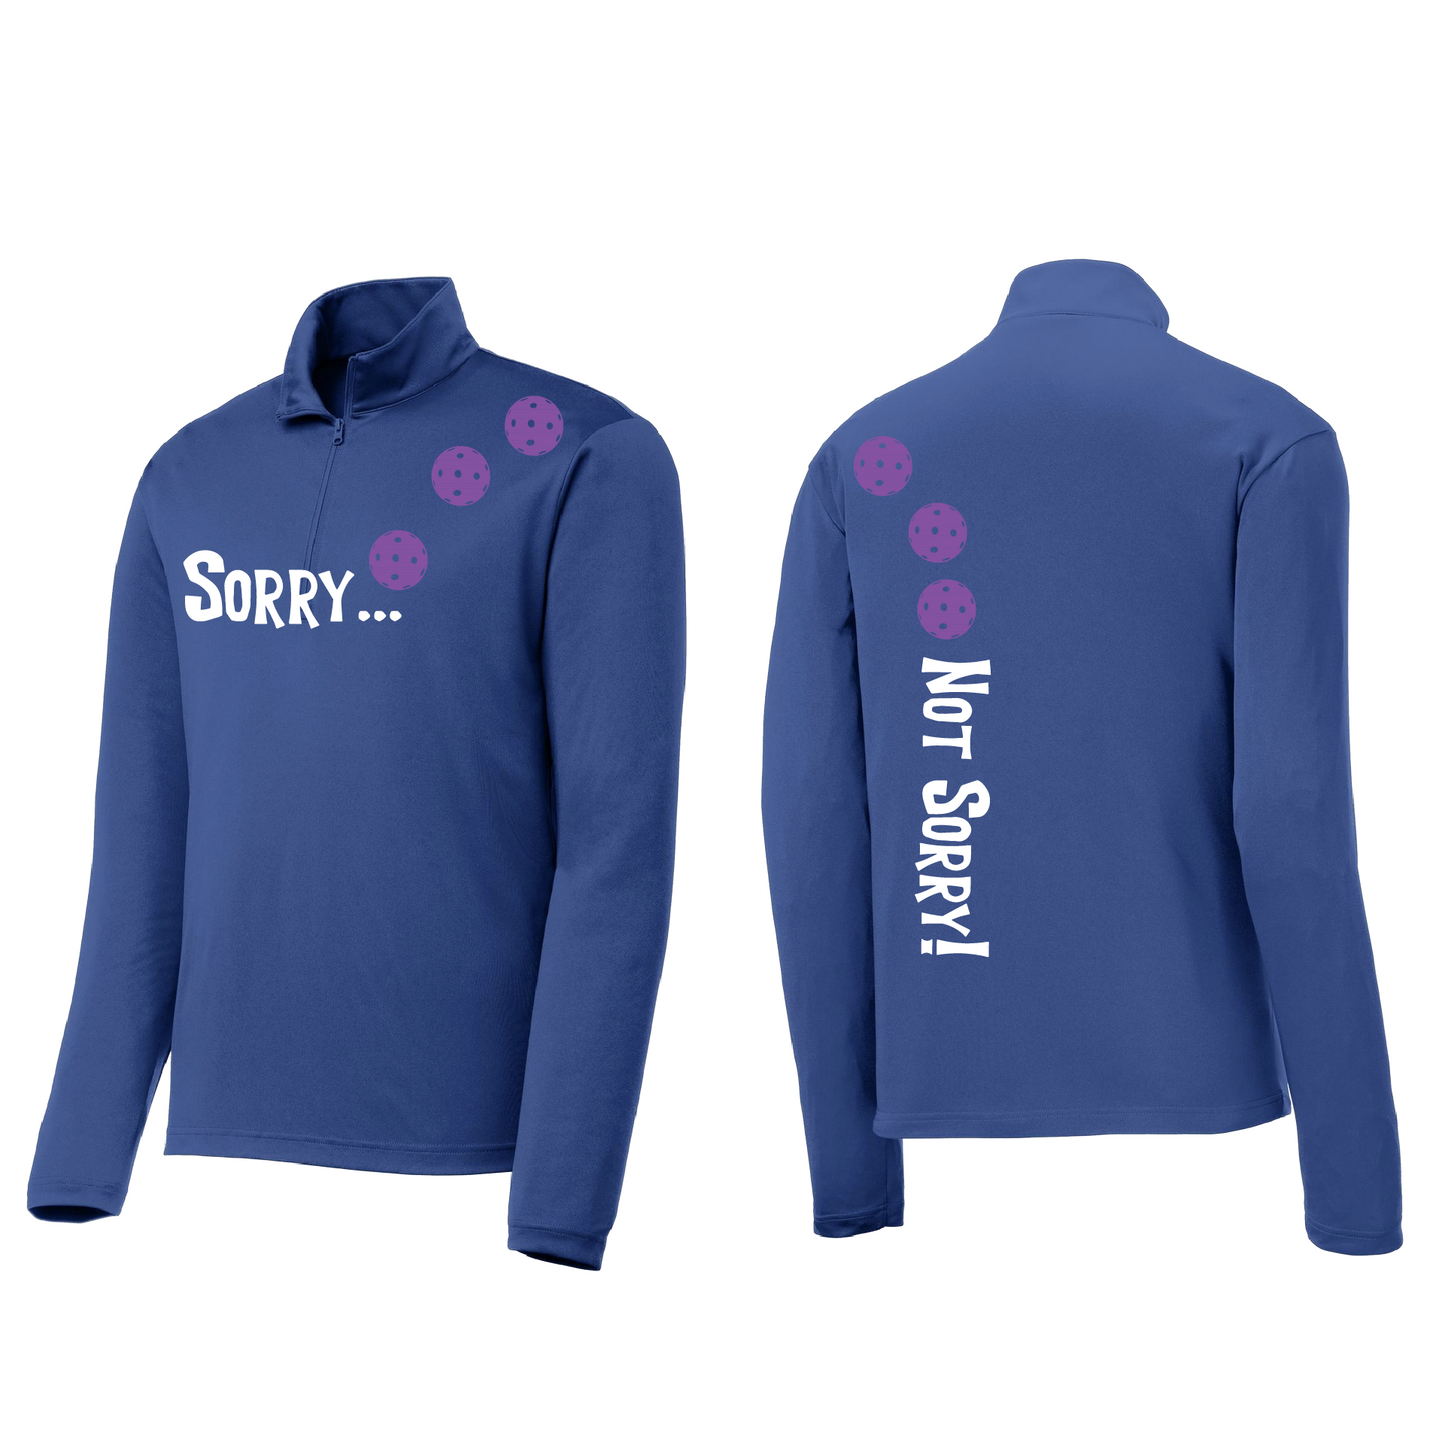 Pickleball Design: Sorry-Not Sorry Pickleball-Men’s 1/4 Zip Pullover-8 Ball Colors ..Customizable Ball Color - Choose: Cyan, Orange, Purple or Rainbow Turn up the volume in this Men's shirt with its perfect mix of softness and attitude. Material is ultra-comfortable with moisture wicking properties and tri-blend softness. PosiCharge technology locks in color. Highly breathable and lightweight. Versatile enough for wearing year-round.